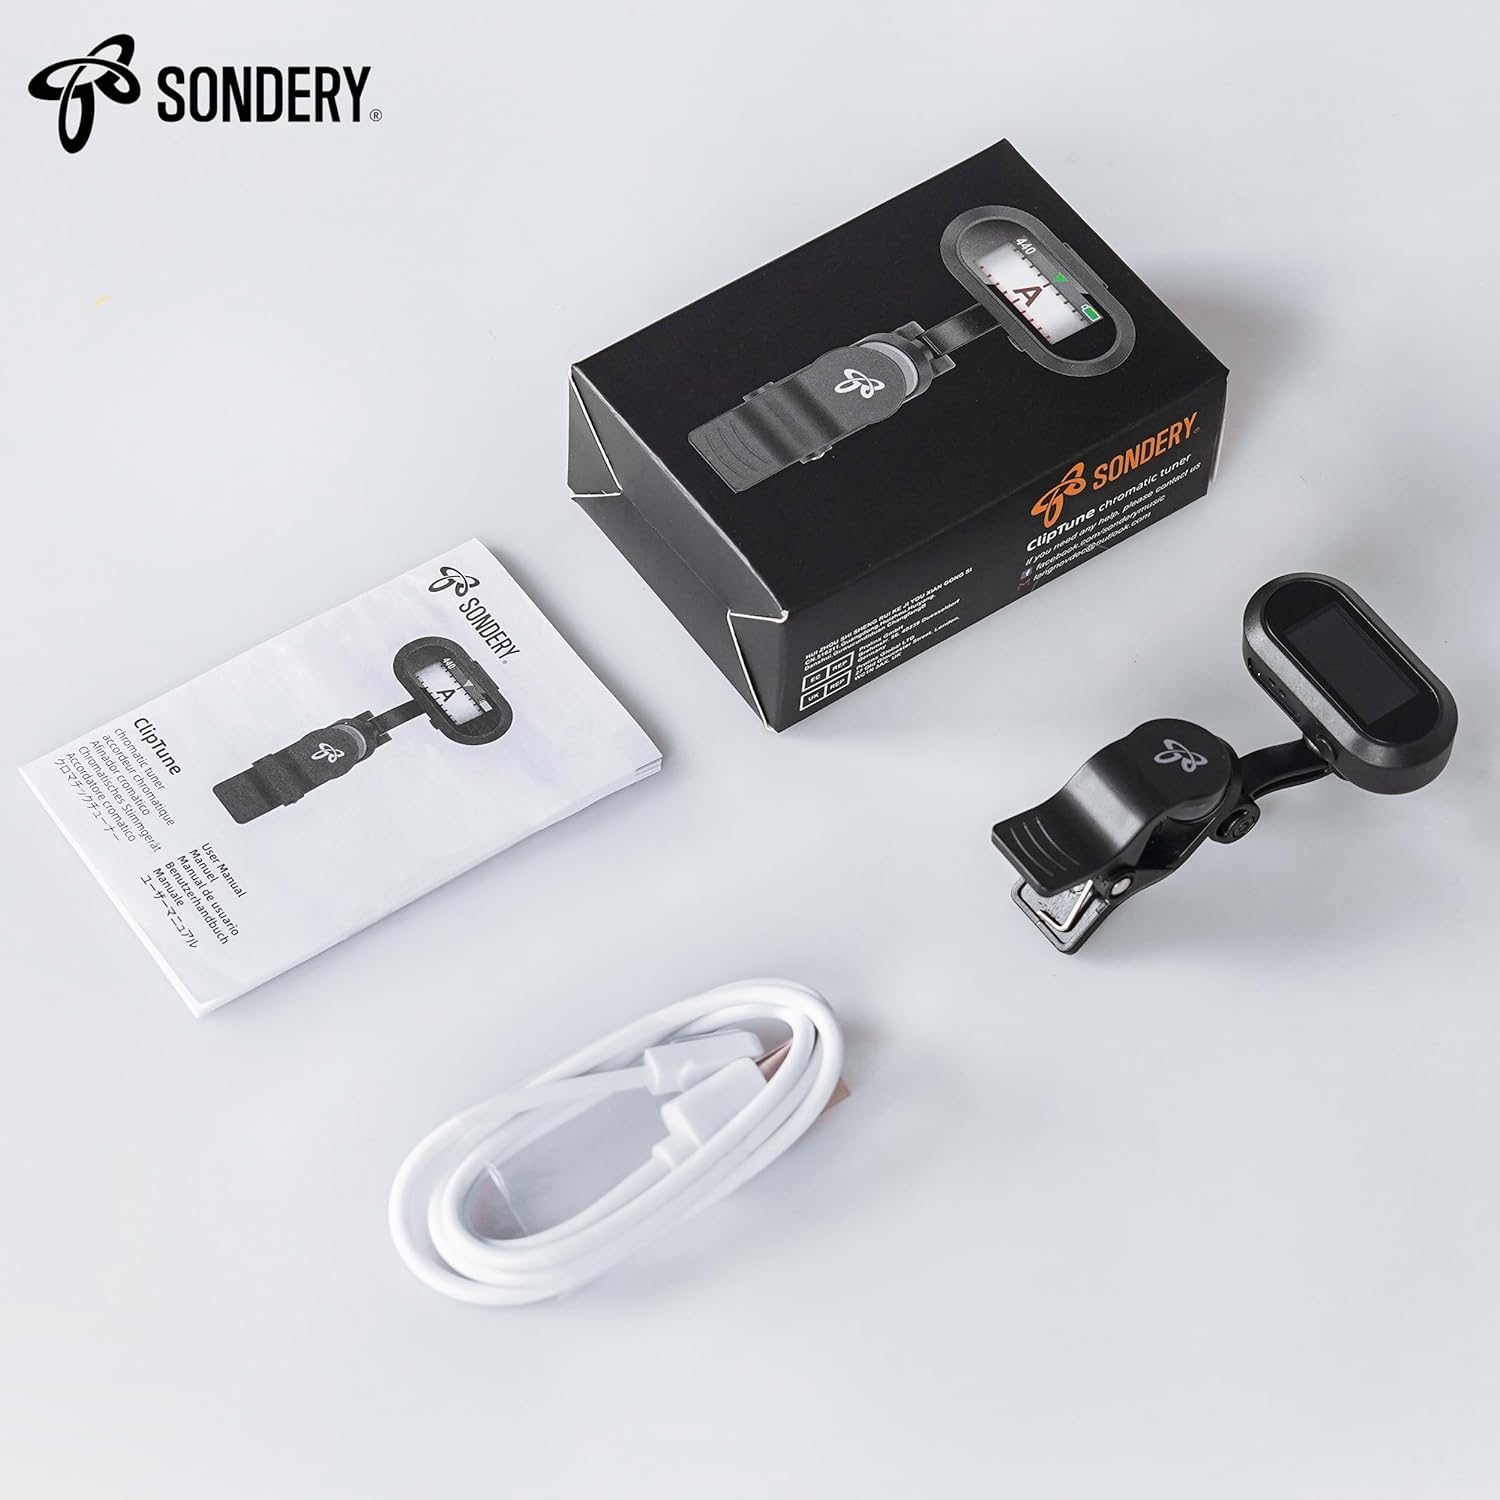 Sondery Clip On Tuner Rechargeable TFT Screen for Guitar Bass Ukulele and Wind Instruments, Headstock Chromatic Tuner Pitch 410-460Hz, Easy to Read in Strong Light, Dual-Rotating Hinges